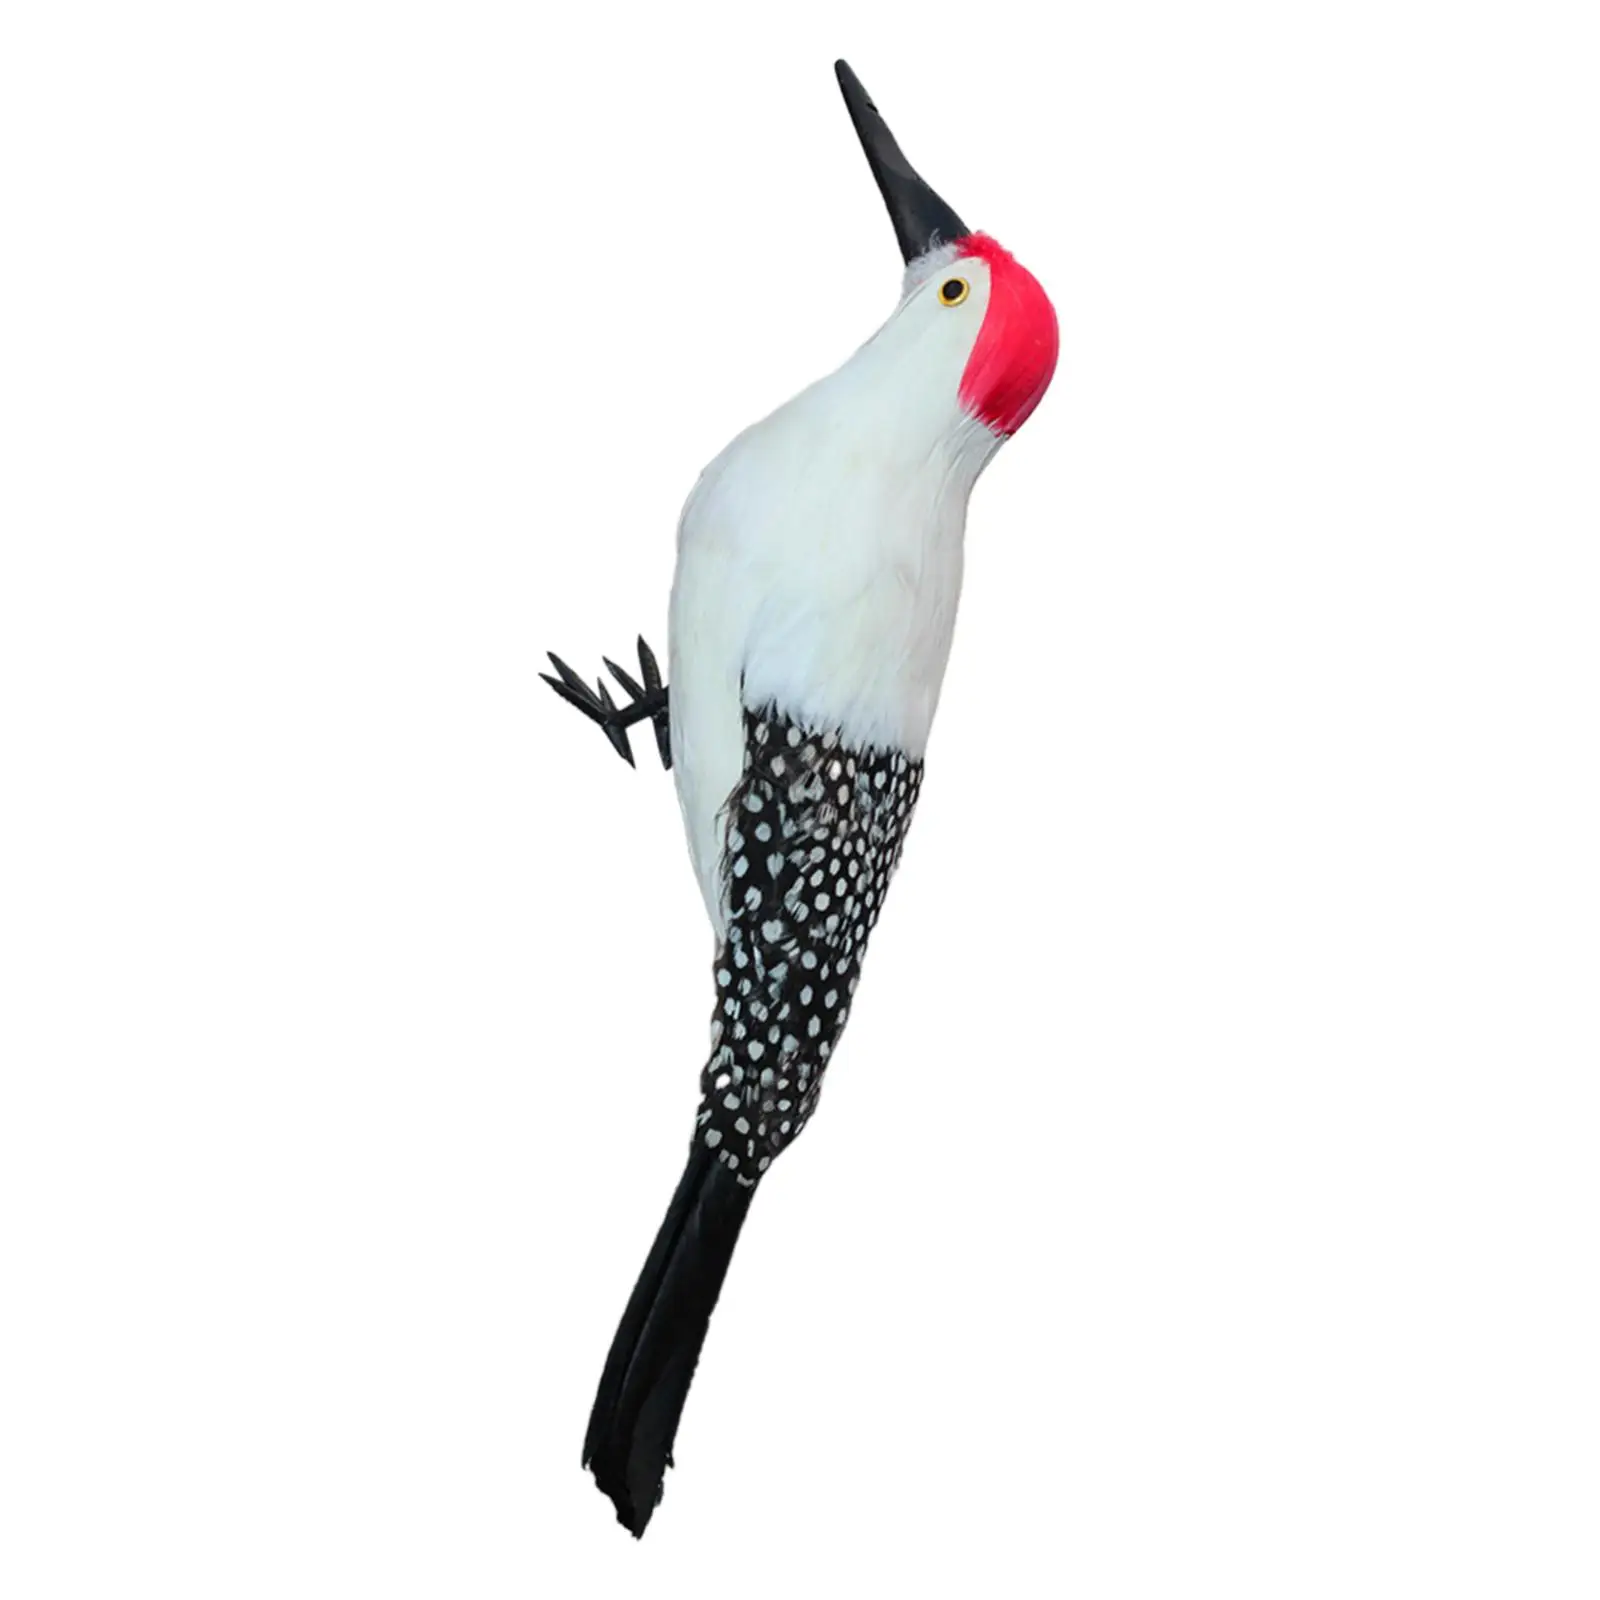 Simulation Woodpecker Handcrafted Faux Cute Scene Model Toys Artificial Feather Weatherproof Art Gift Statue Ornament Decorative